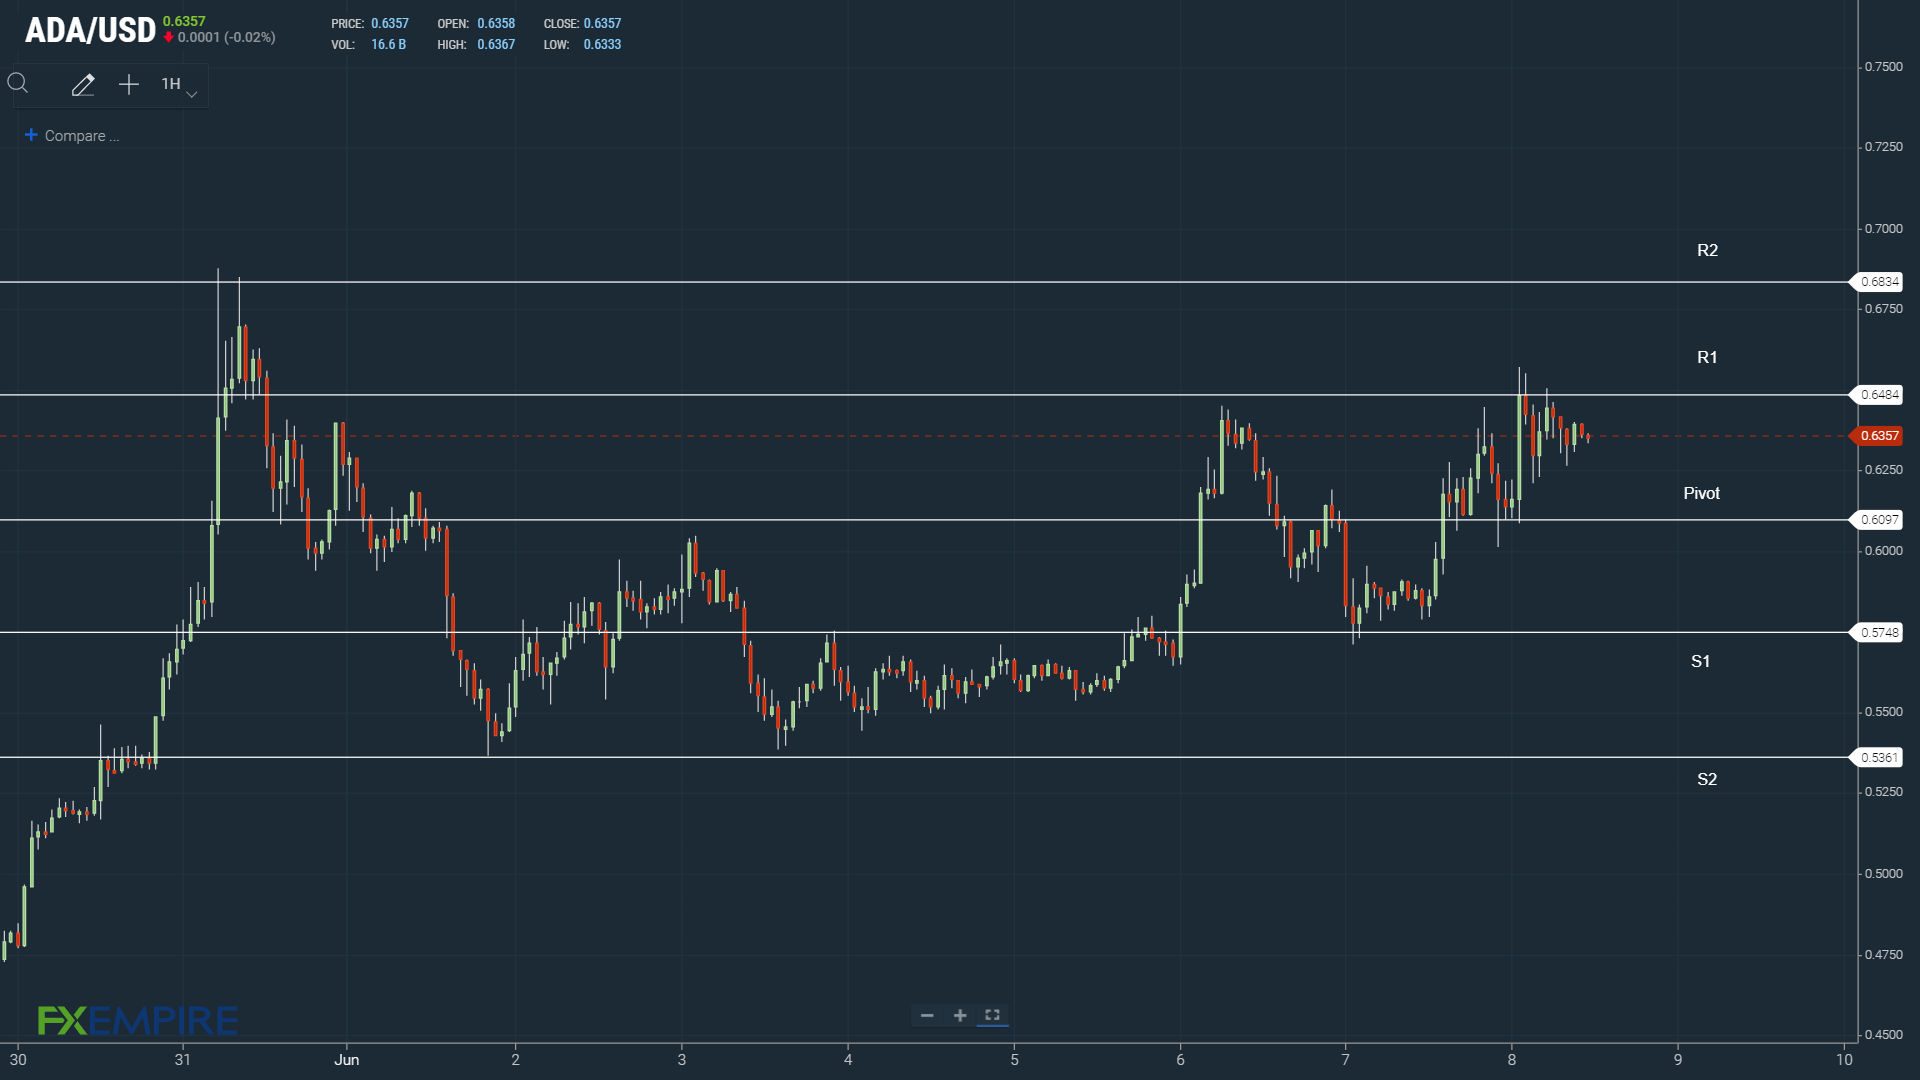 Cardano resistance levels in play.